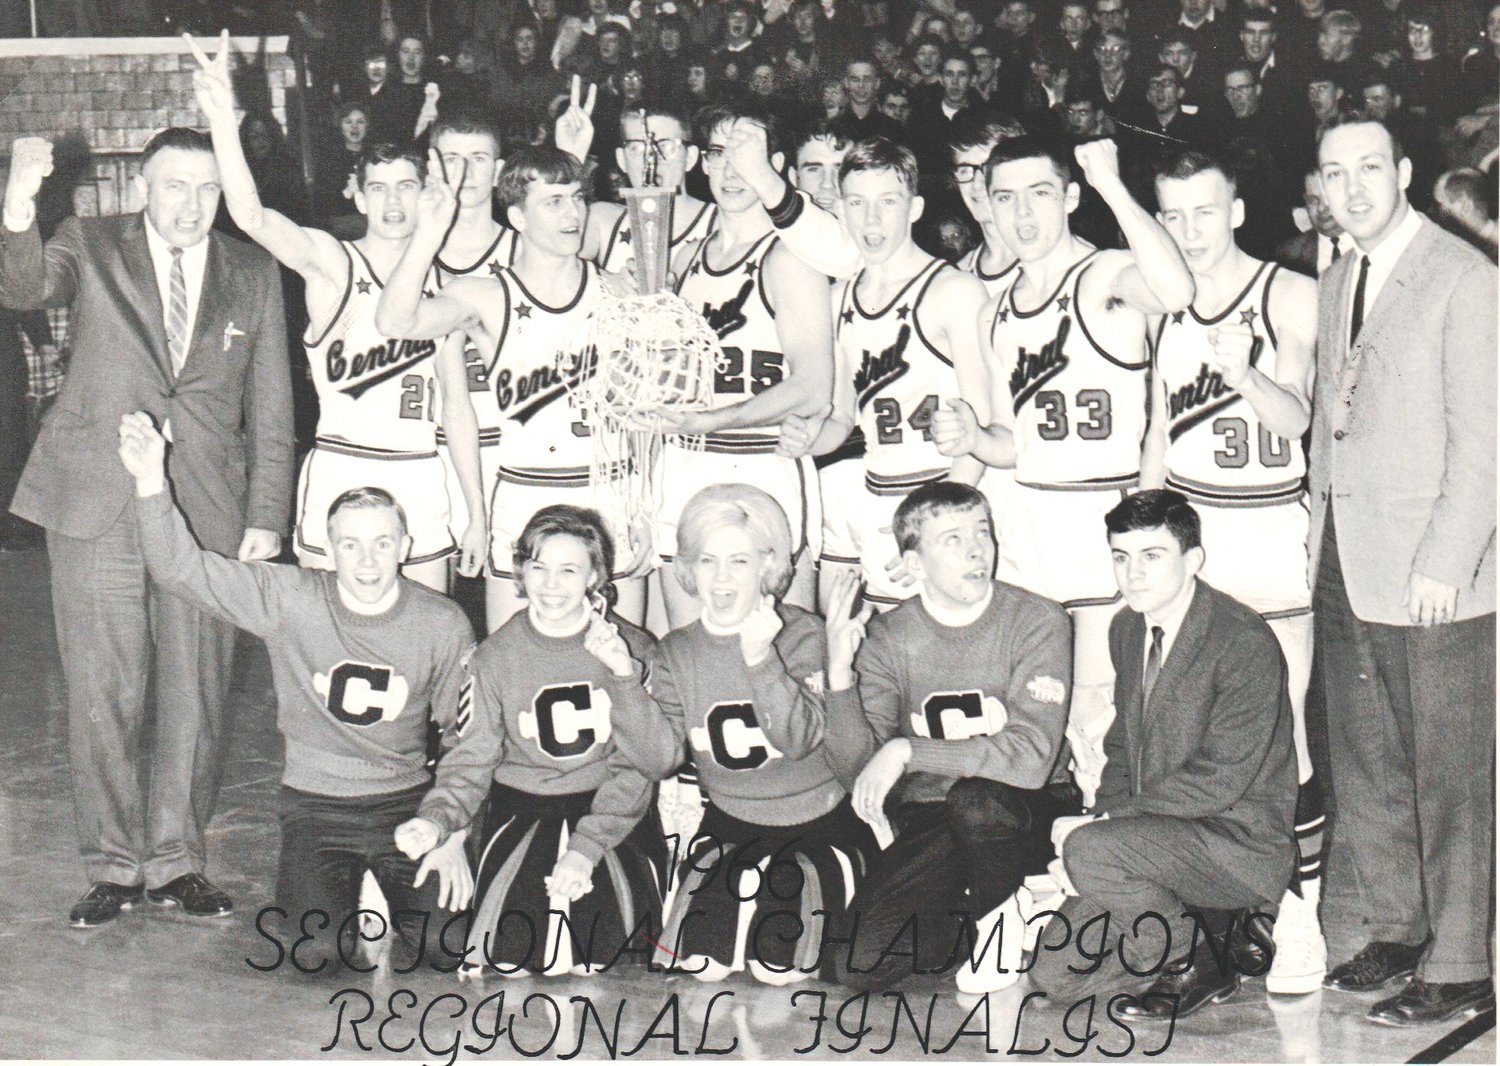 Coal Creek Central won its only sectional title in 1966.